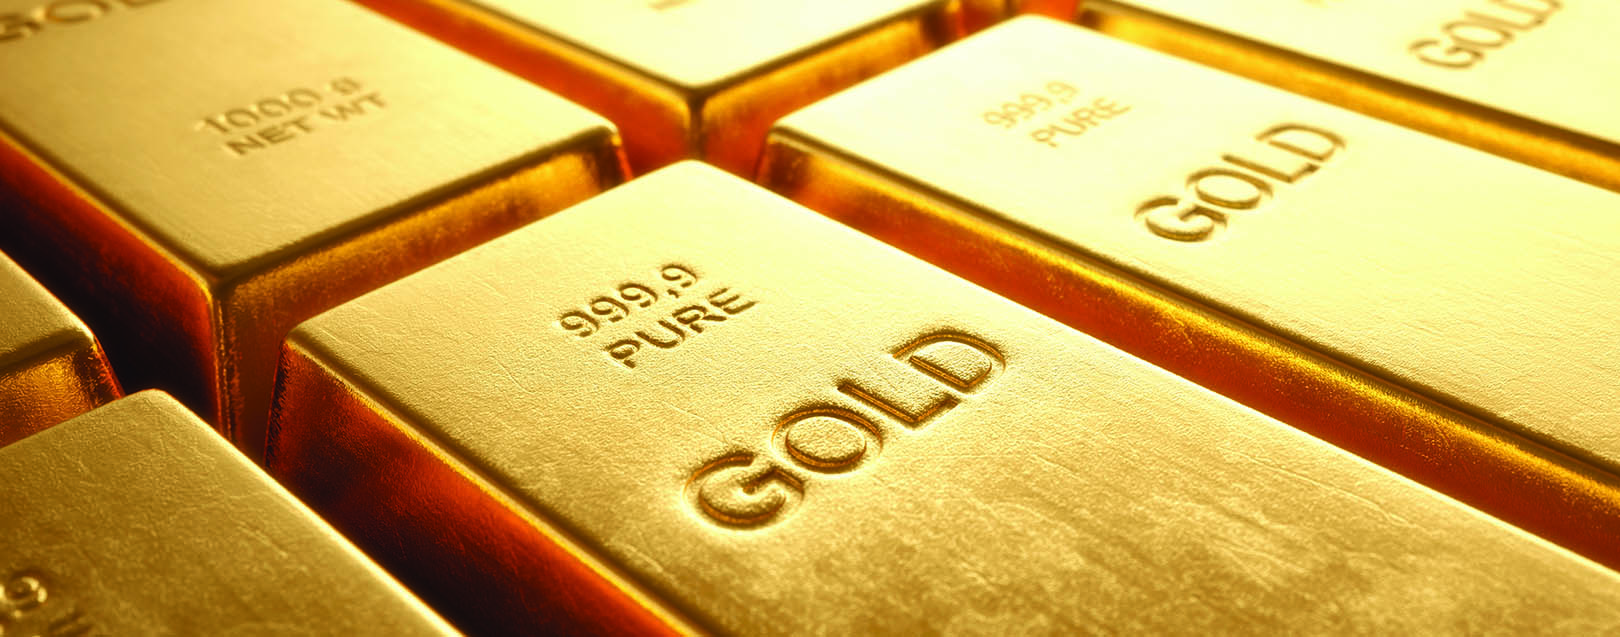 Gold – Time for the next gold rush? March 2018 issue